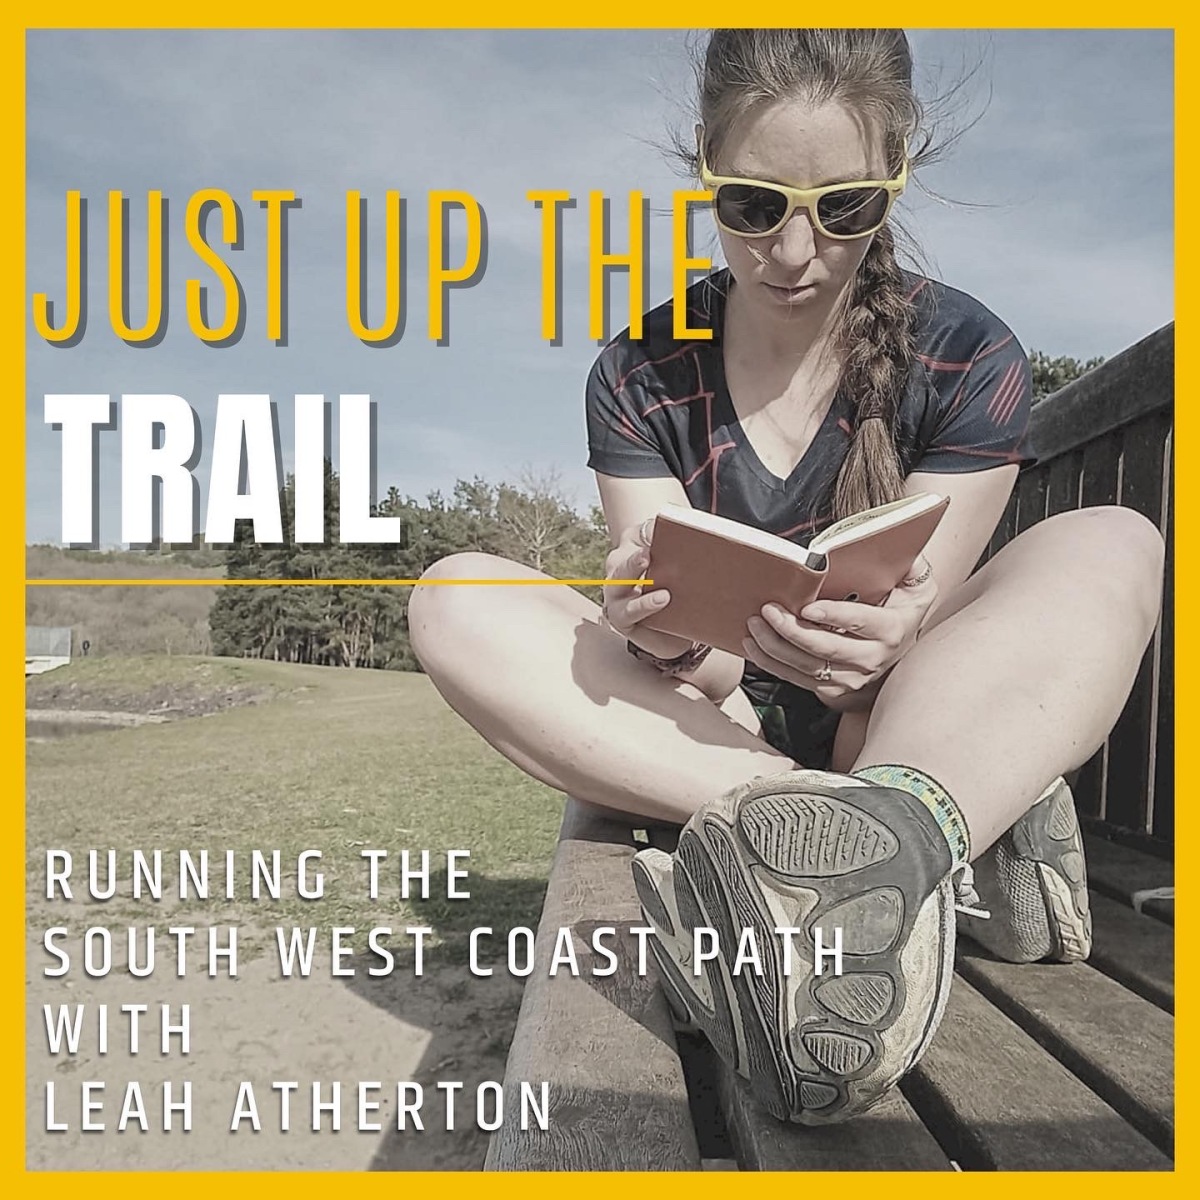 Running the South West Coast Path with Leah Atherton